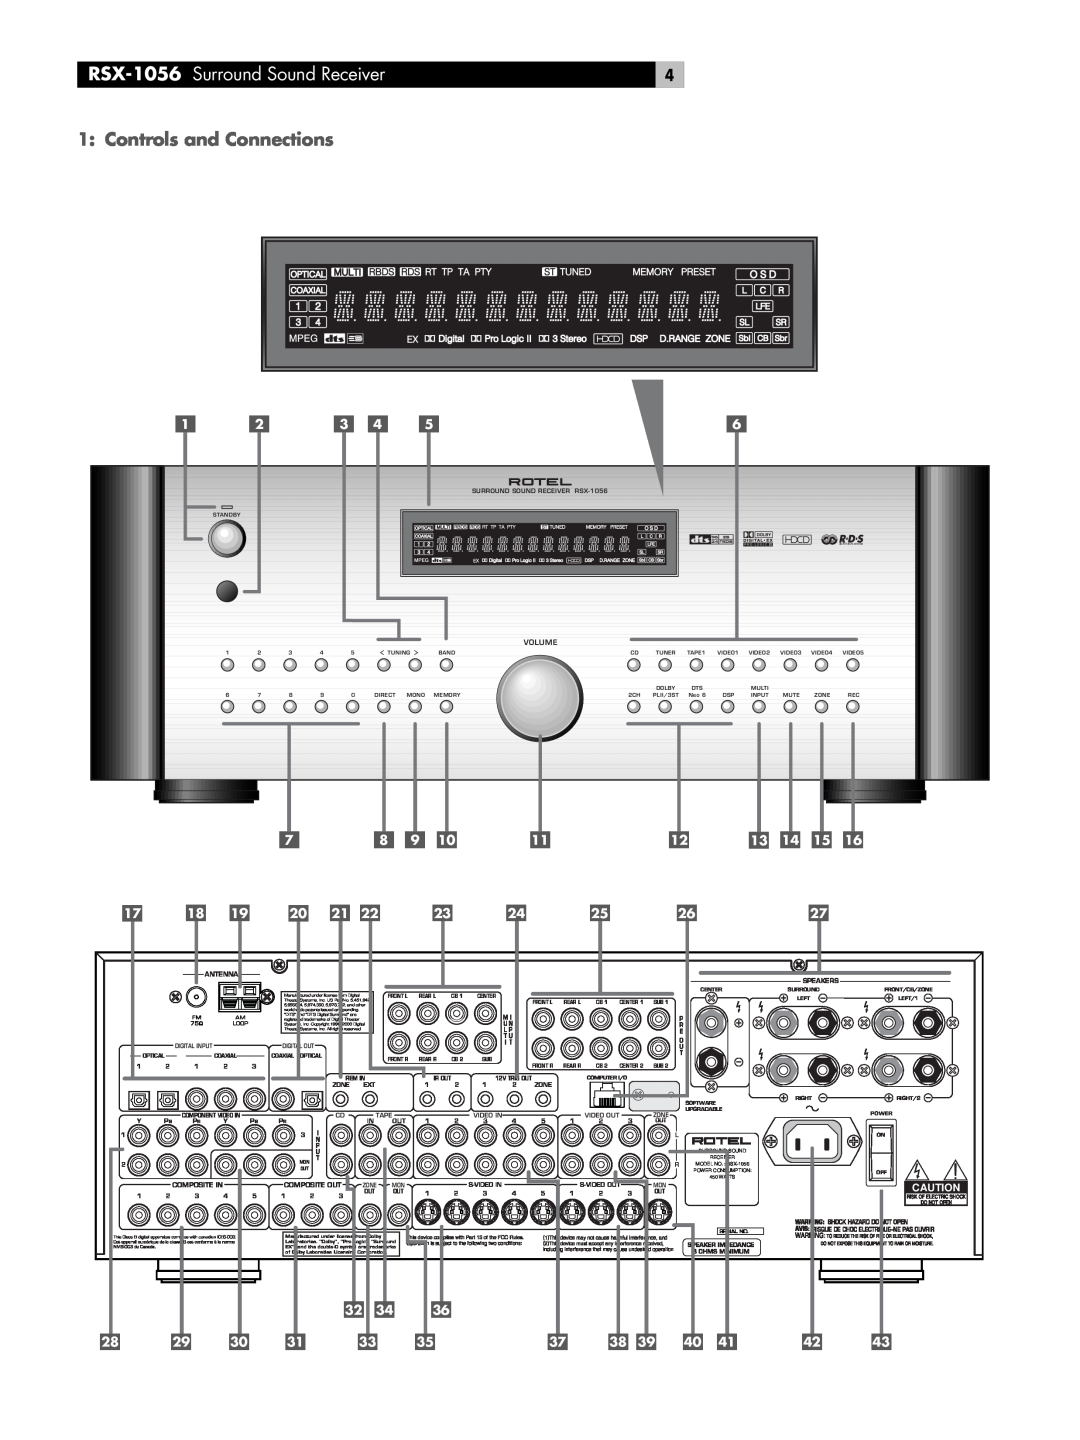 Rotel owner manual RSX-1056 Surround Sound Receiver, Controls and Connections 